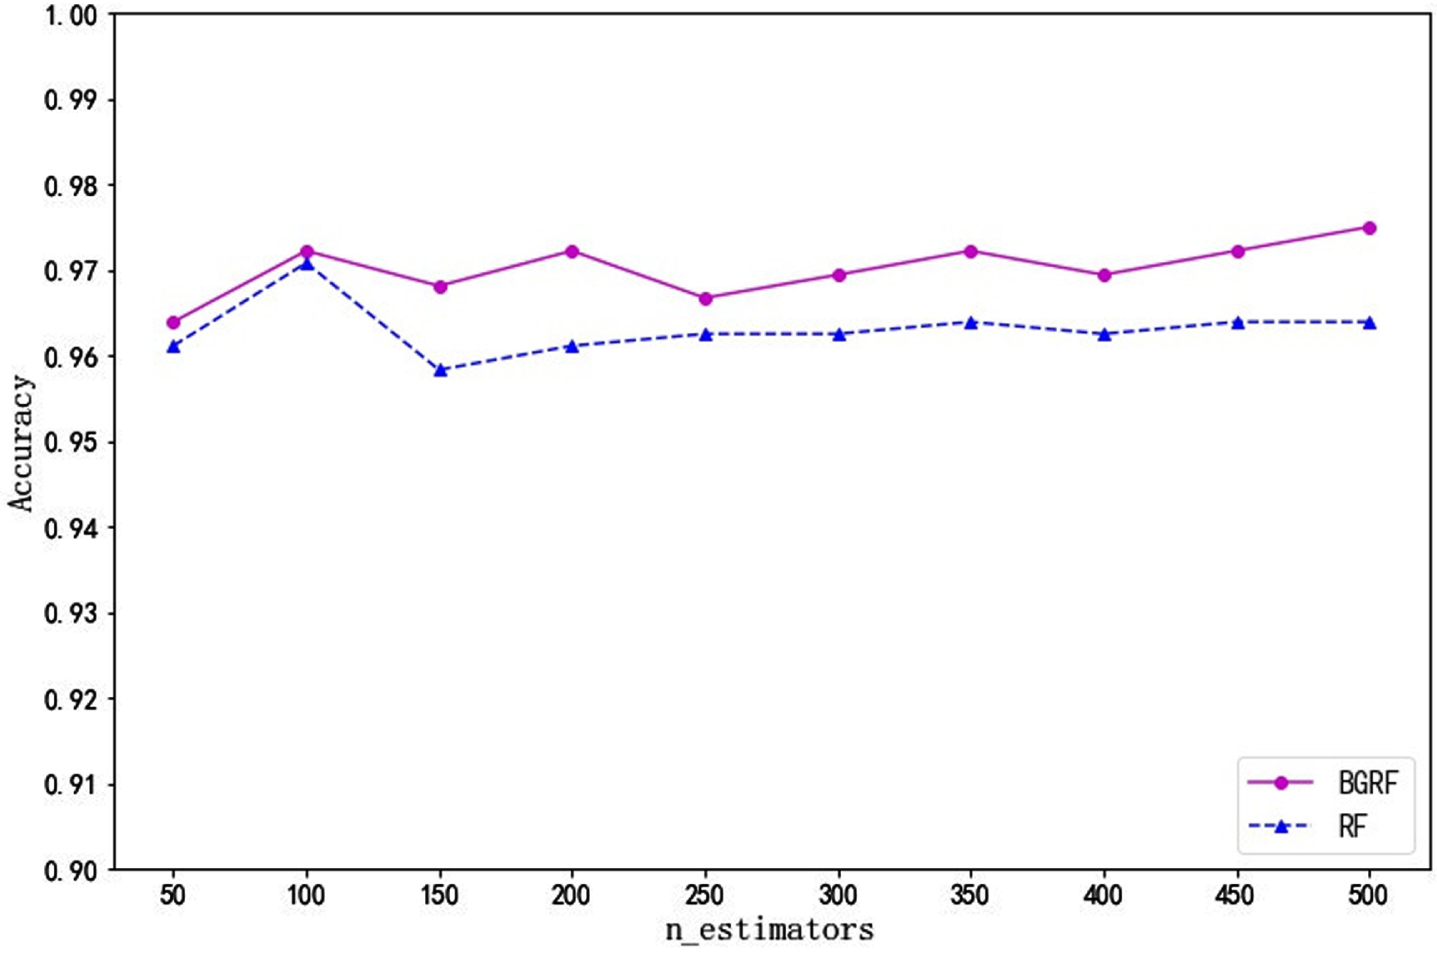 Accuracy of the data set Newthyroid over different numbers of trees.